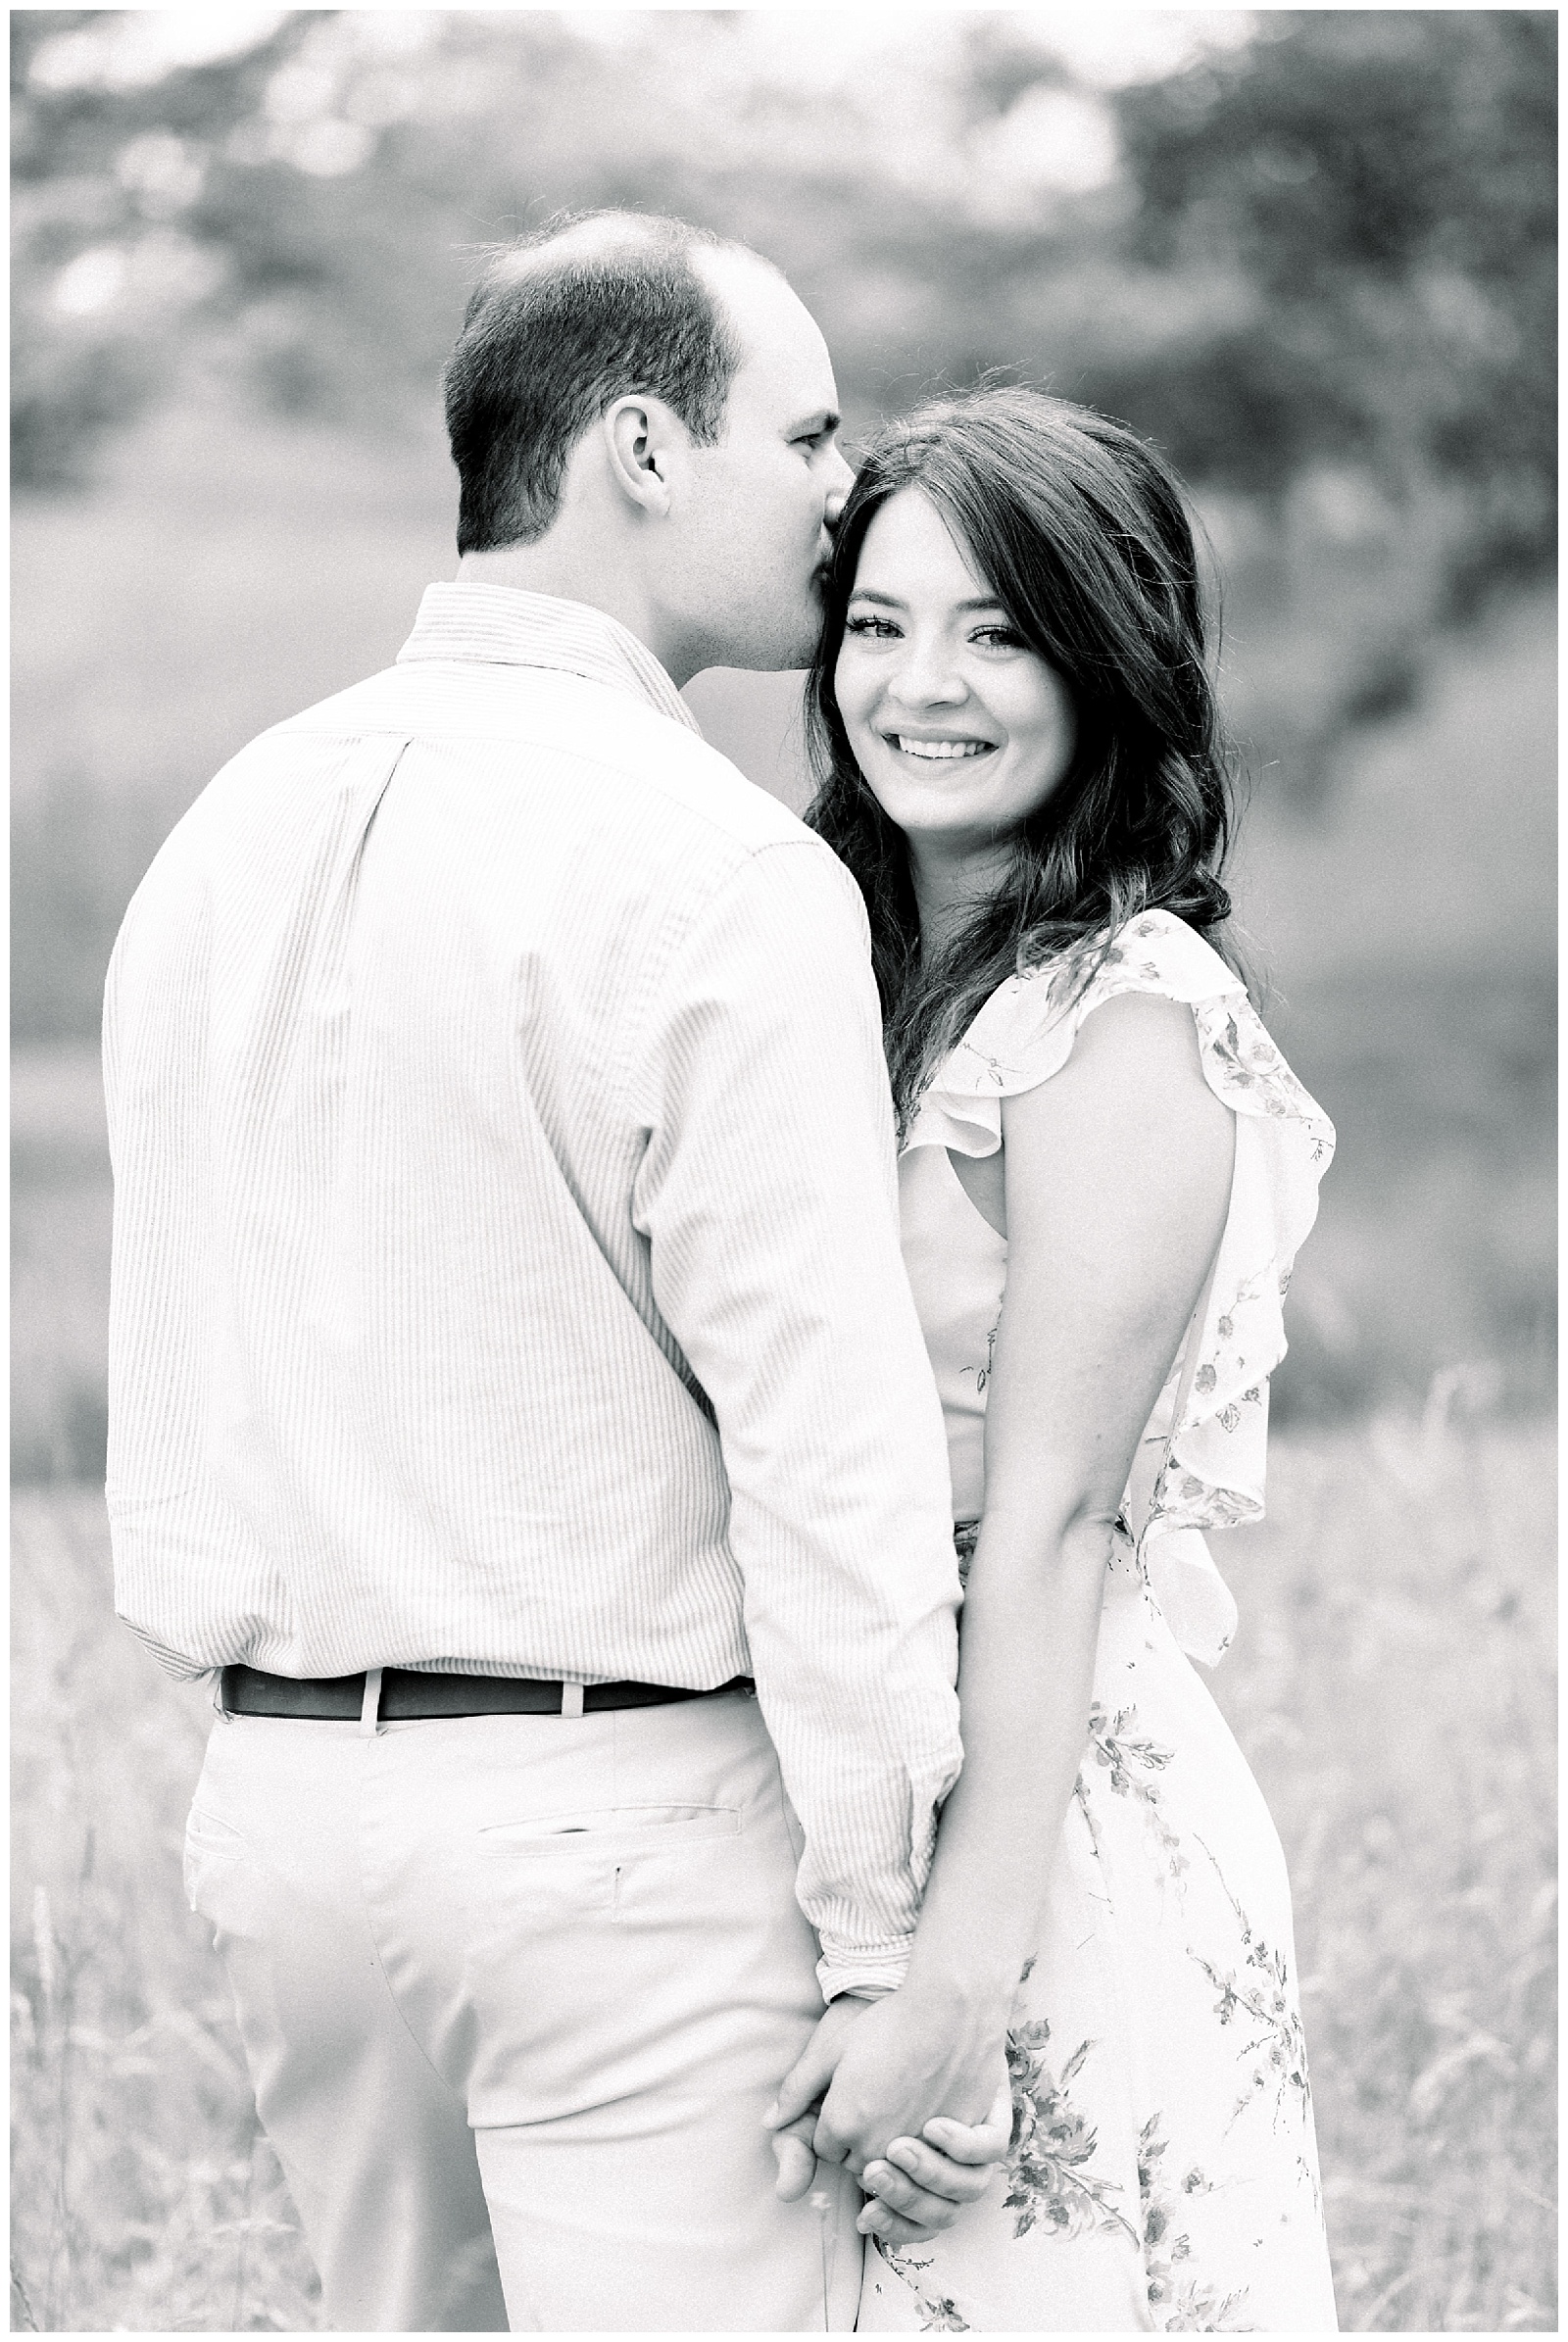 The_Biltmore_Estate_Engagement_Session_Katheryn_Jeanne_Photography